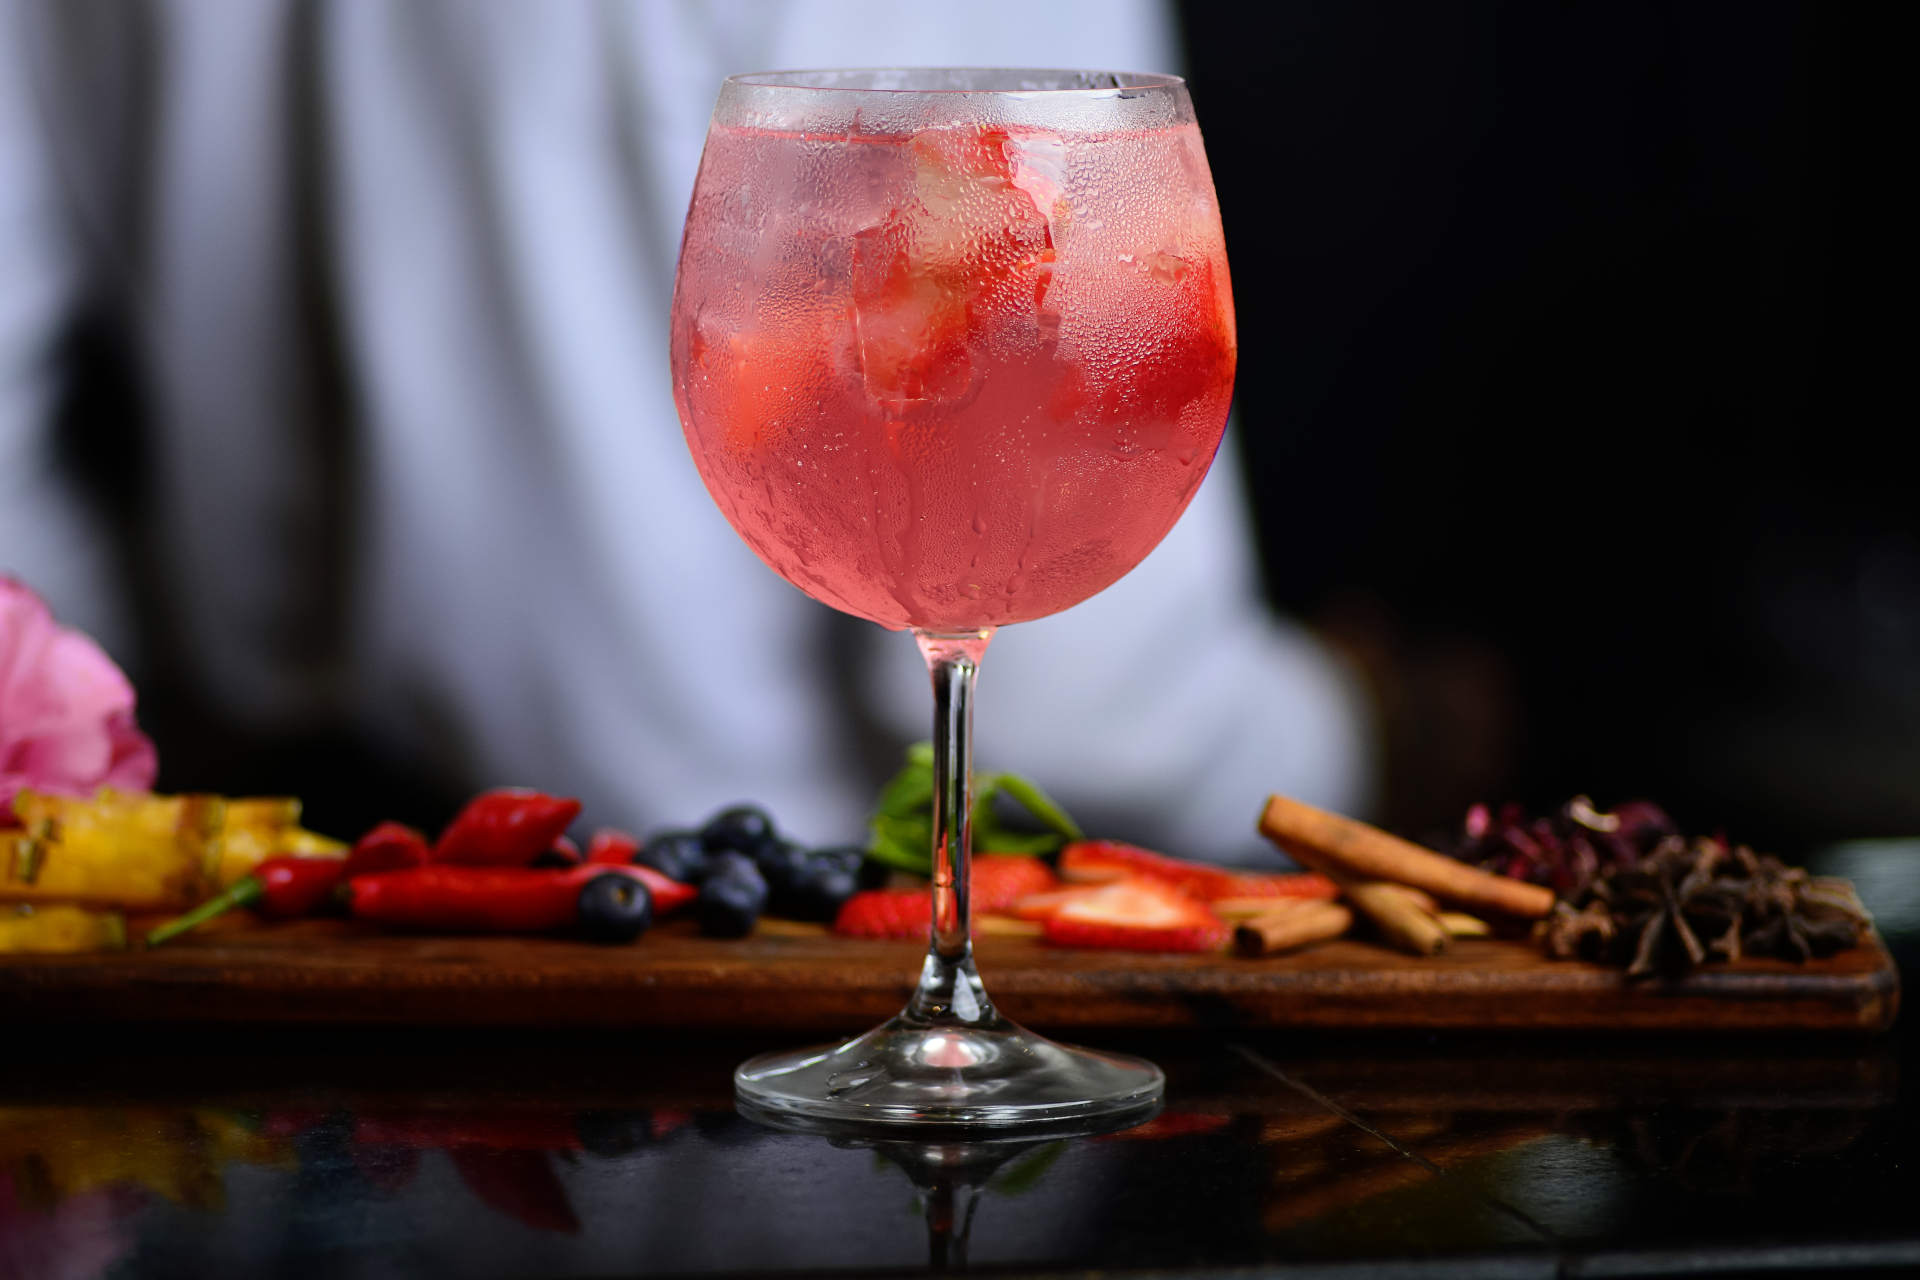 Fruity Vino in a glass beside spices on a dark bar